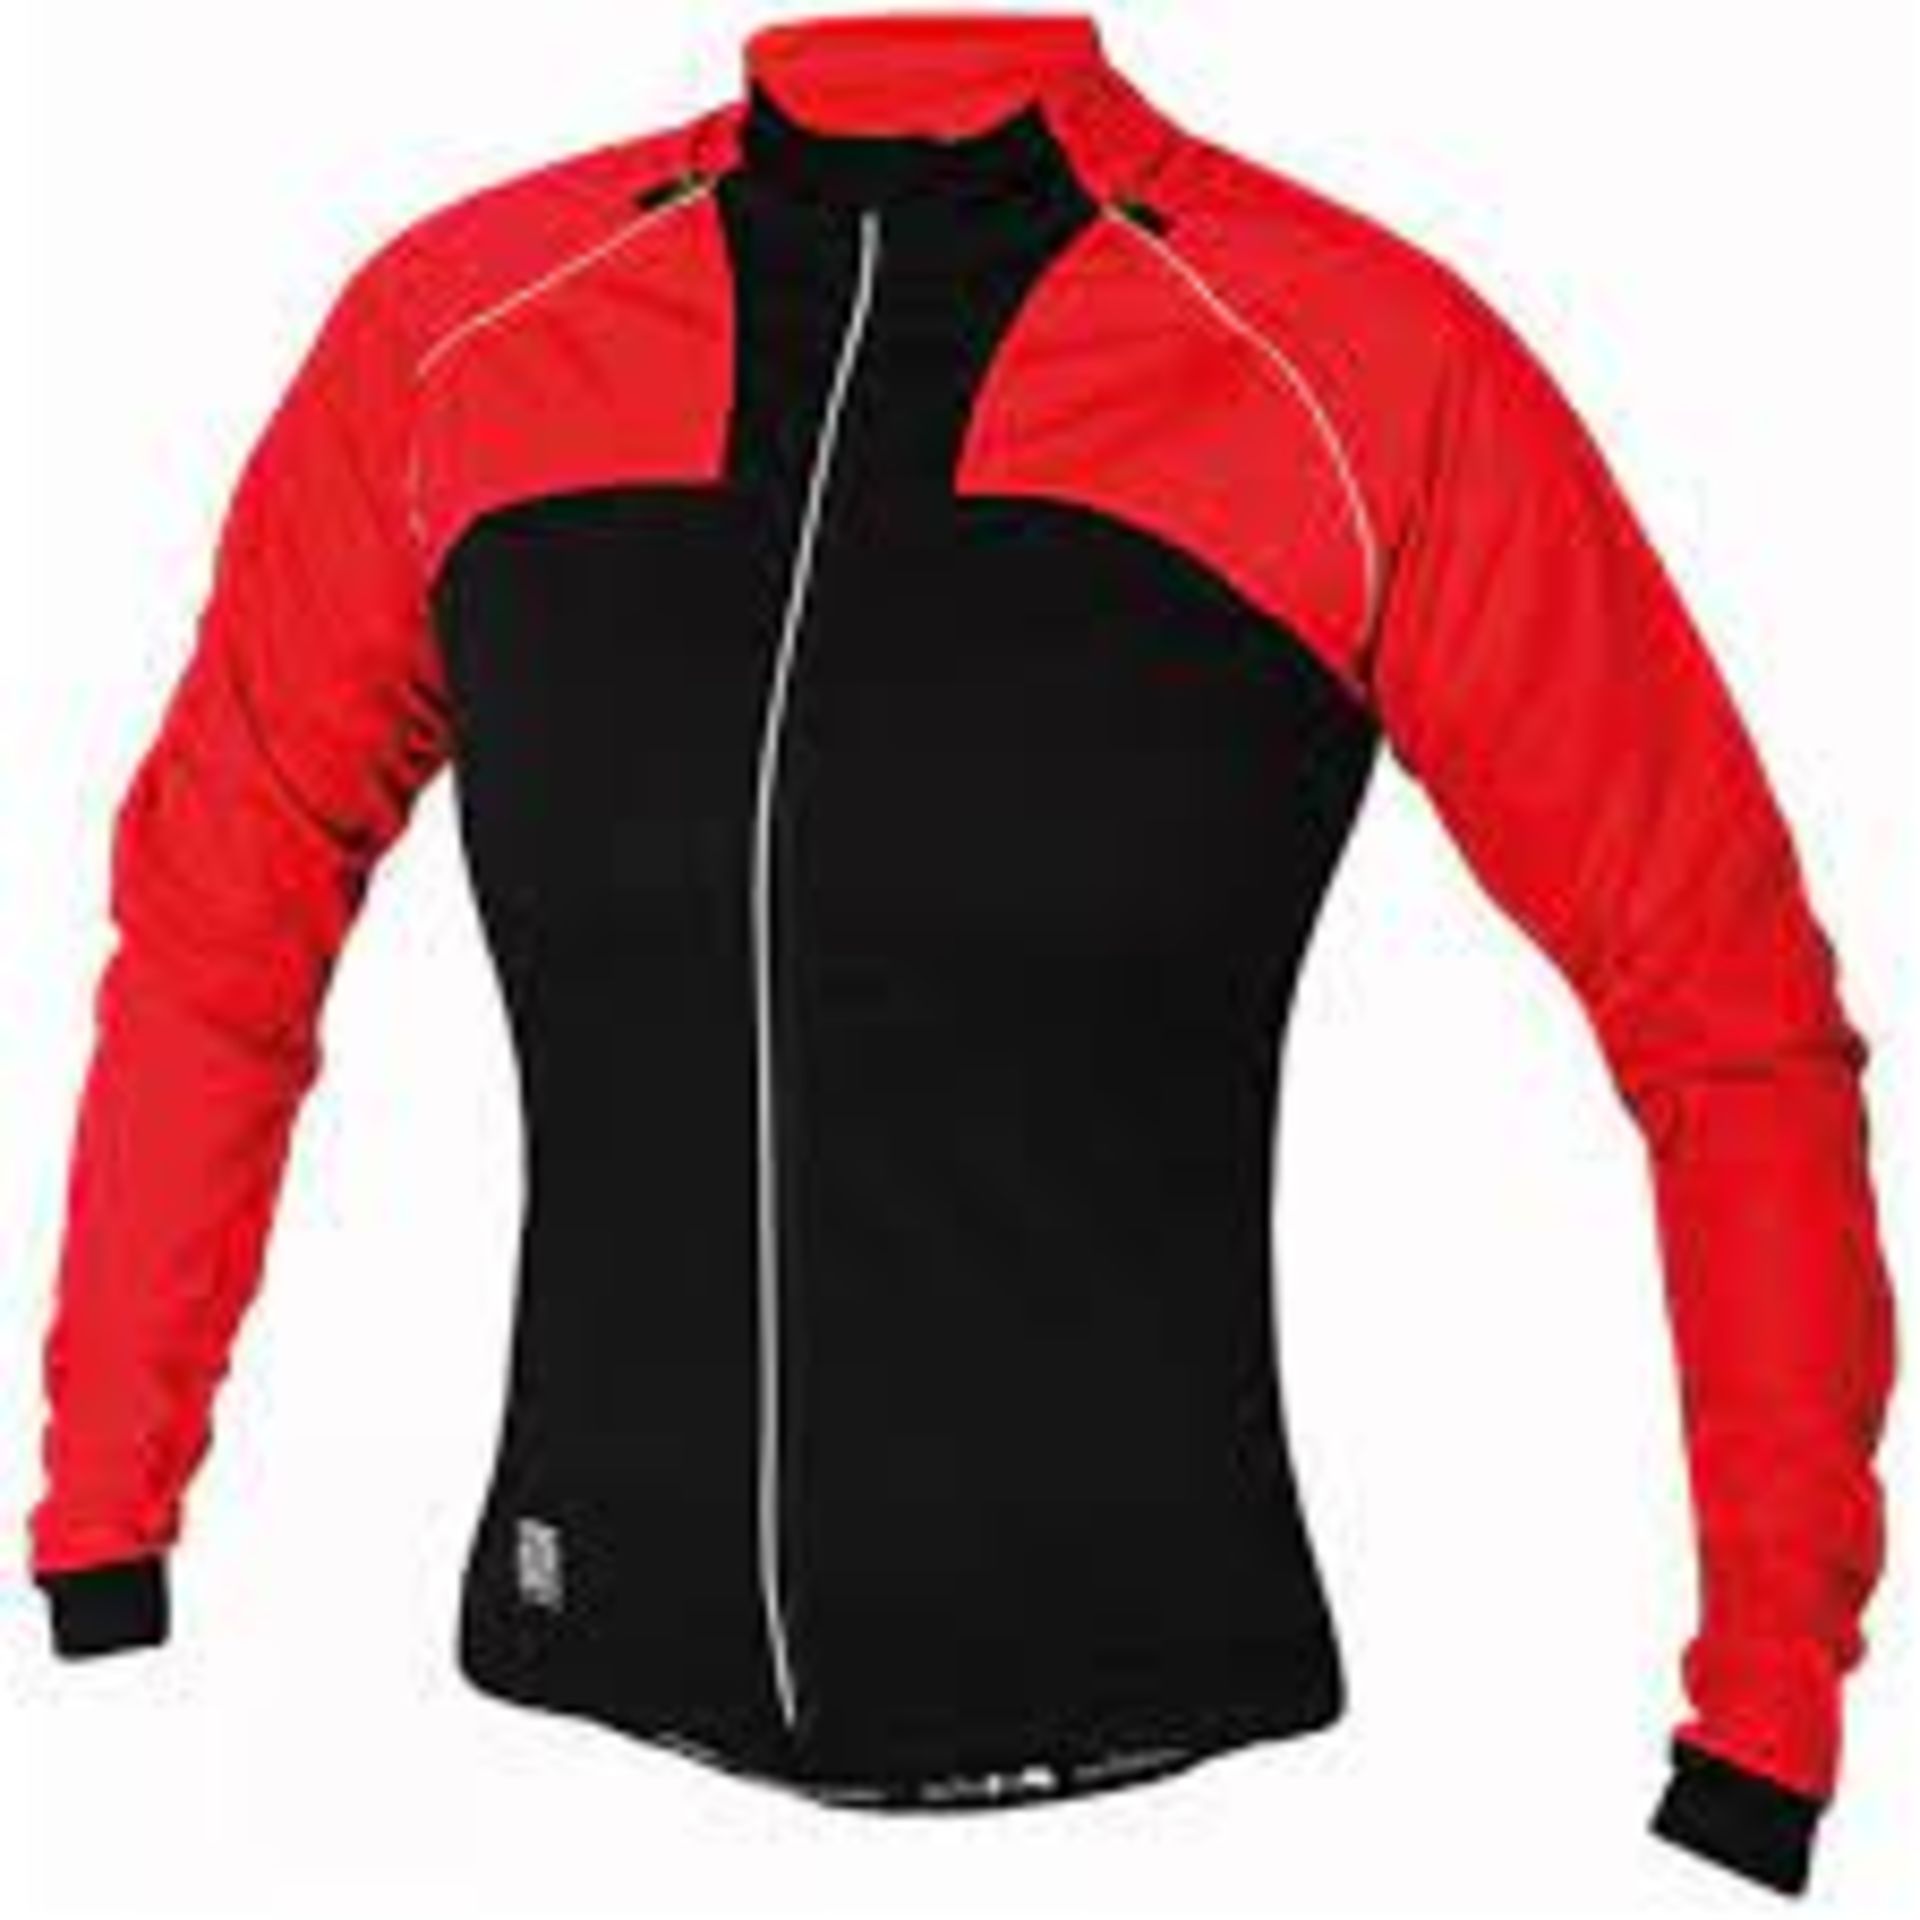 710 Items of Cycle Stock - Sold As One Lot – Original RRP £55,671.08 - Gloves, Helmets, Jackets, - Image 26 of 51